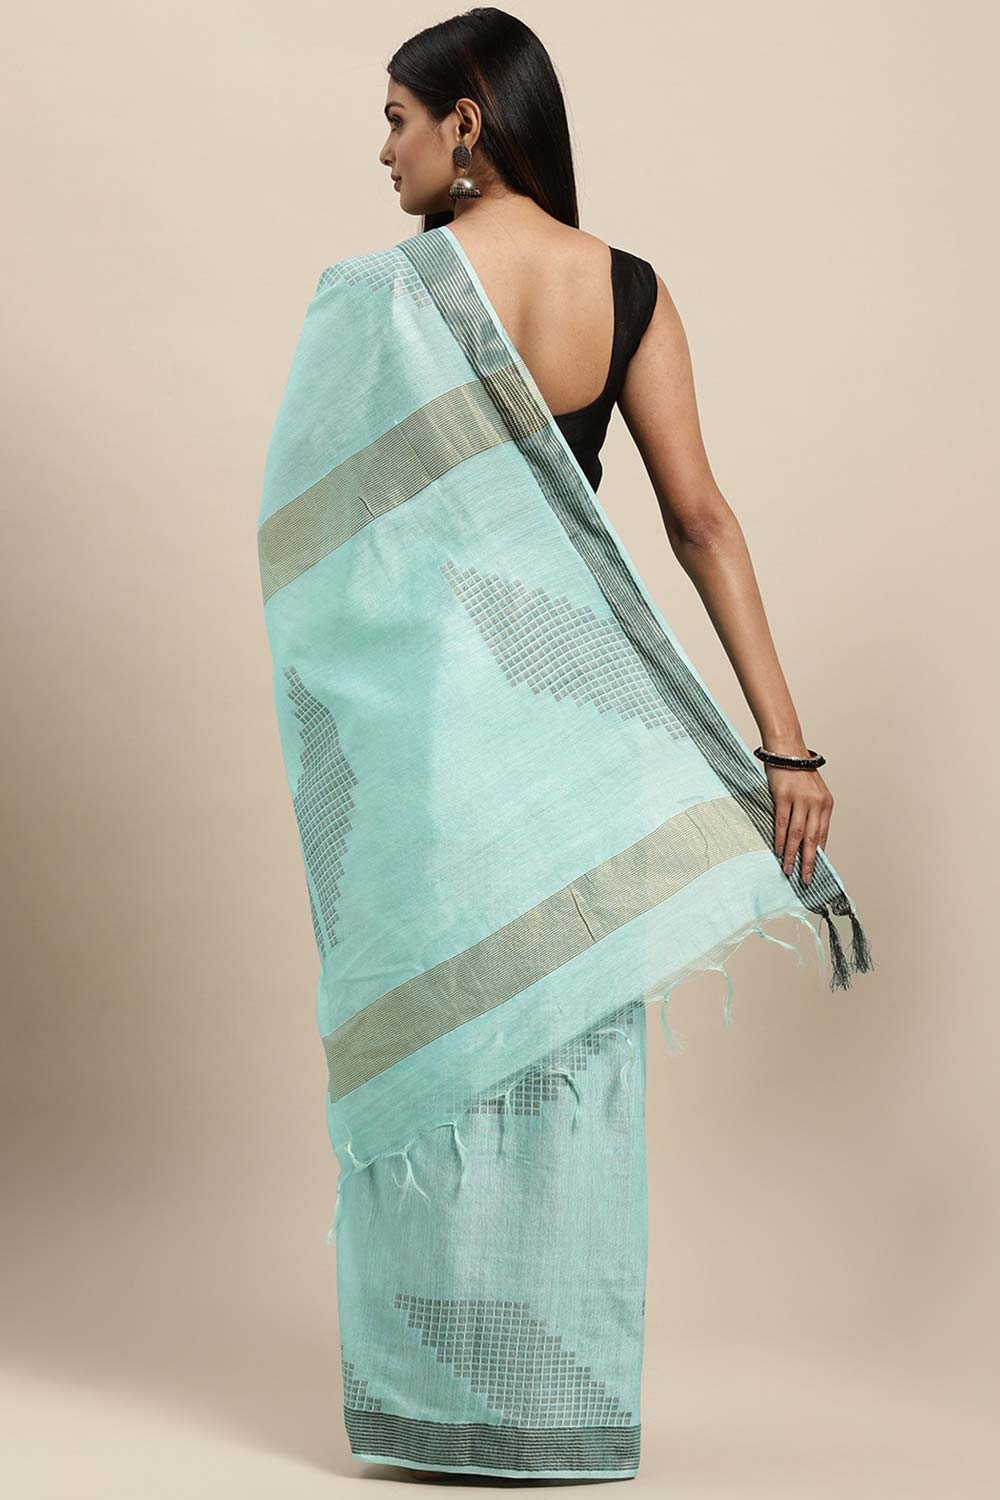 Shop Betsy Blue Silk Blend Woven One Minute Saree at best offer at our  Store - One Minute Saree